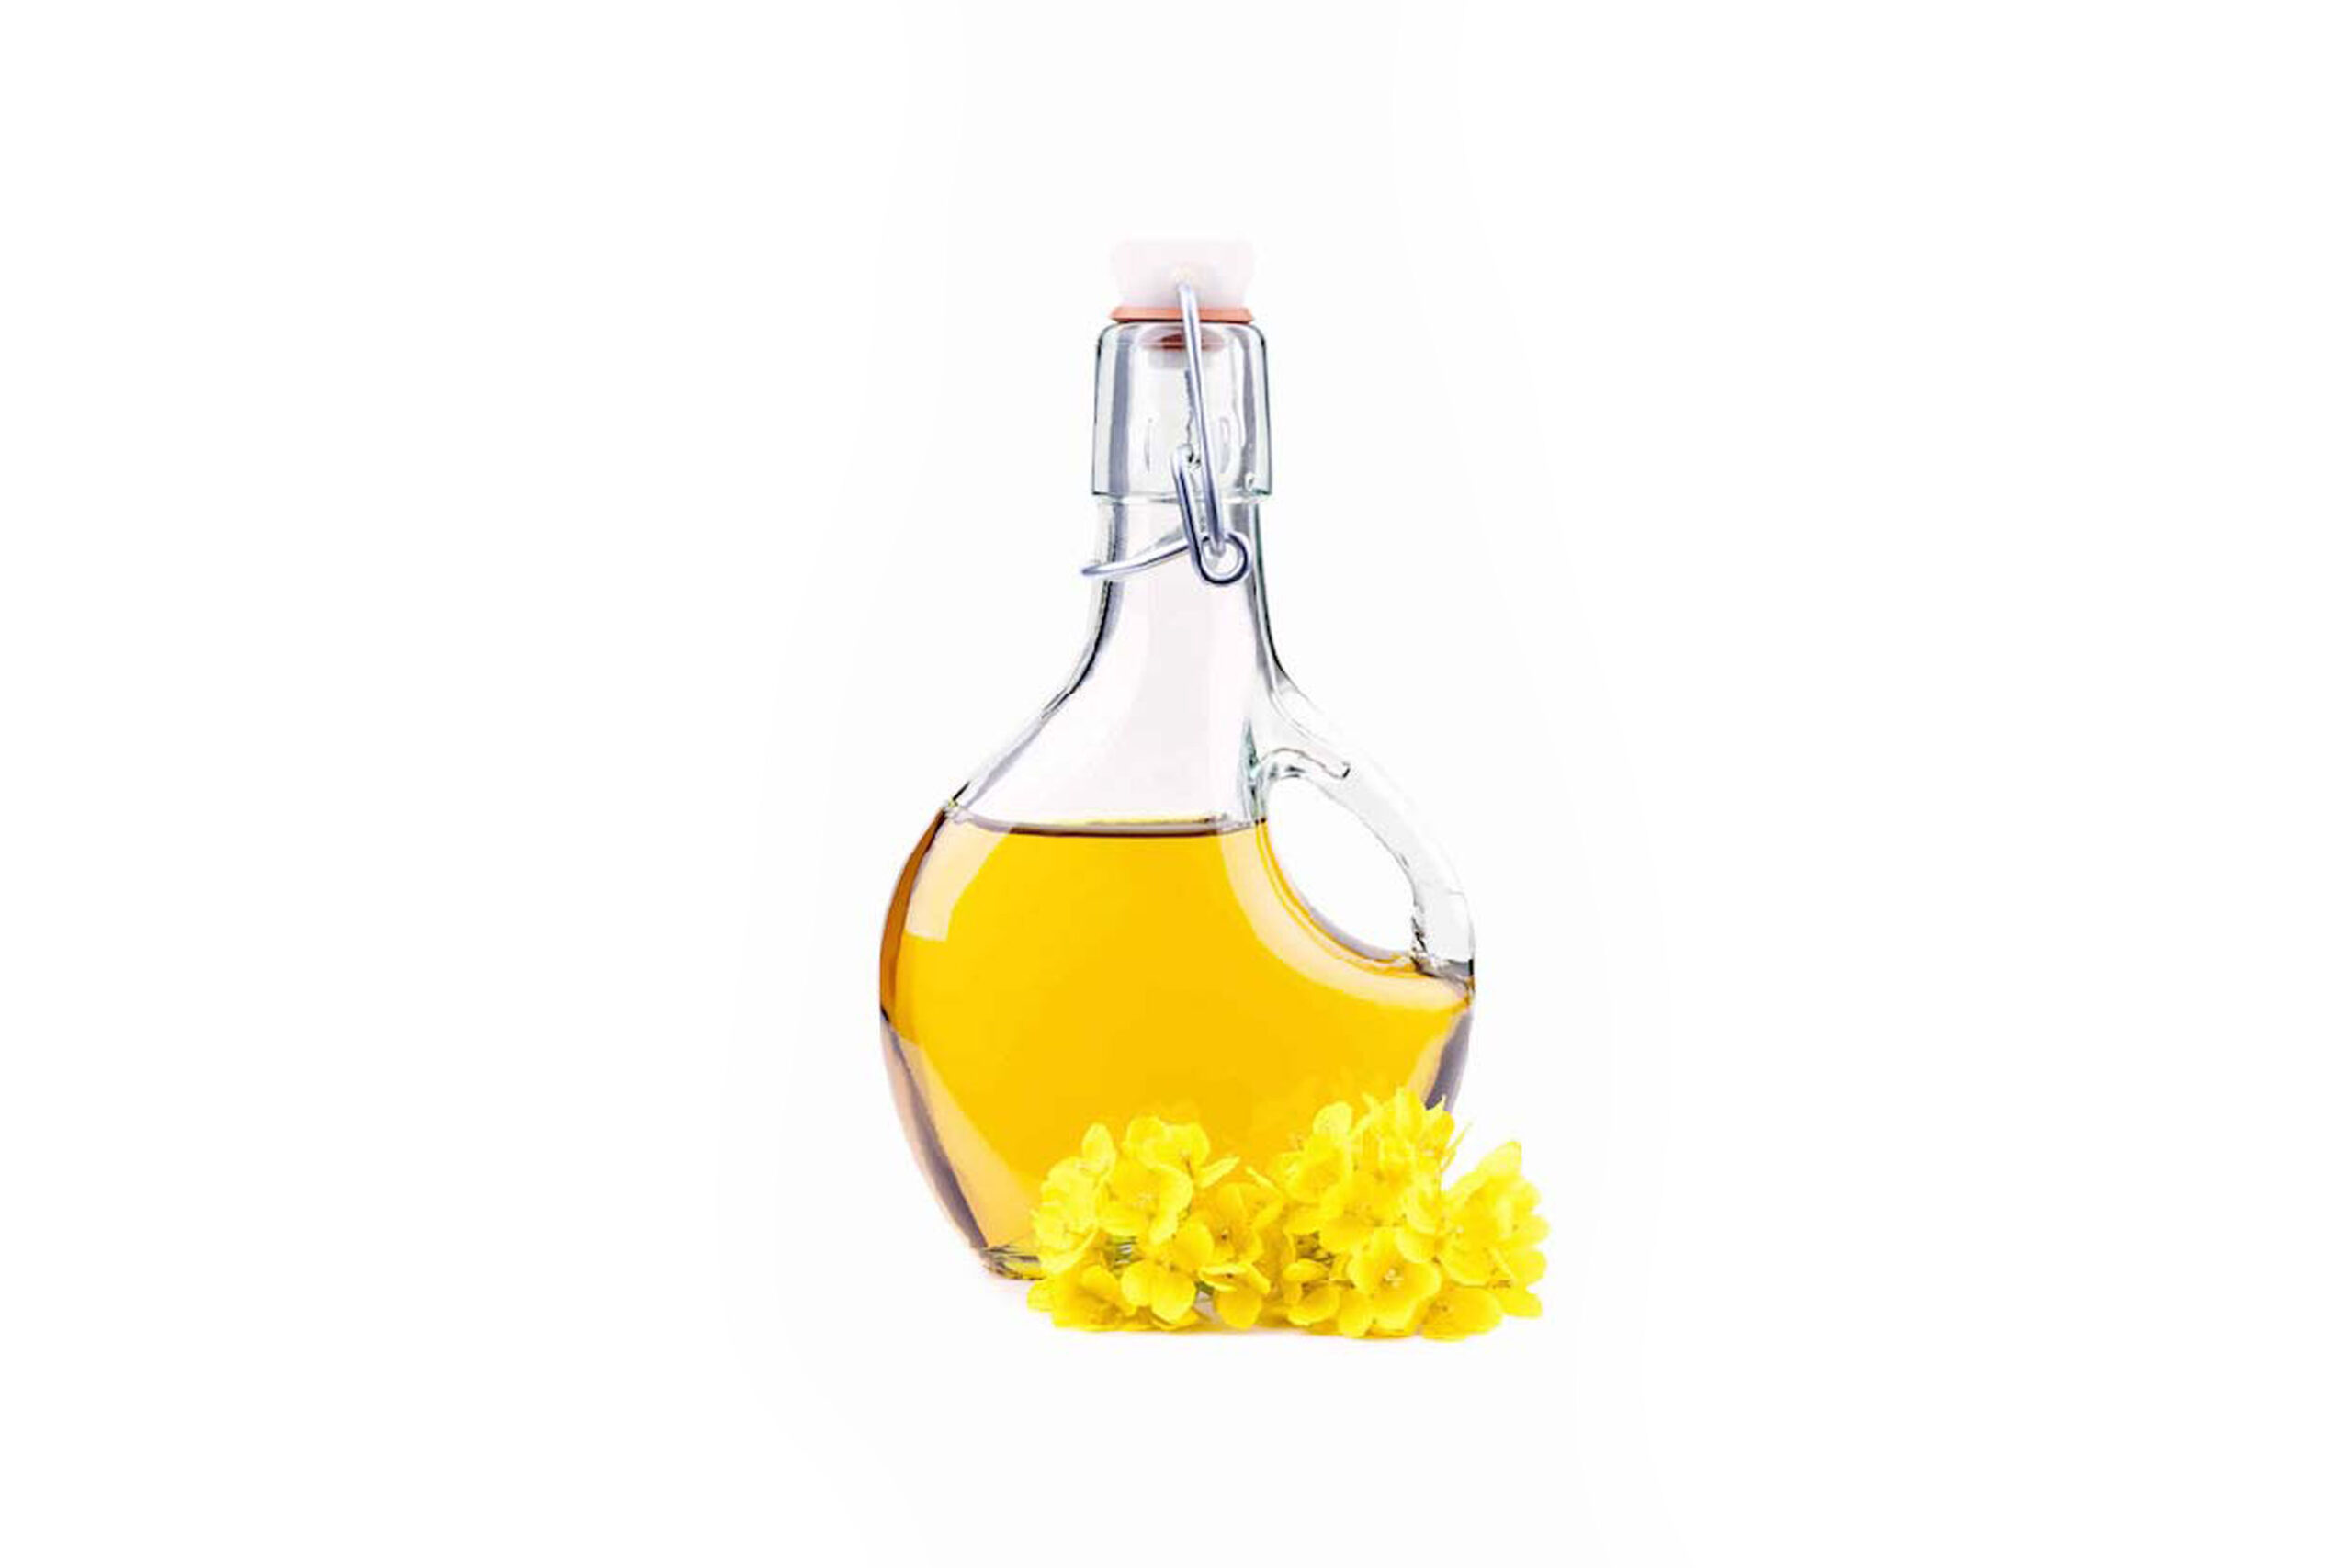 A glass jar of canola oil with rapeseed blooms in the bottom front all on a white background.